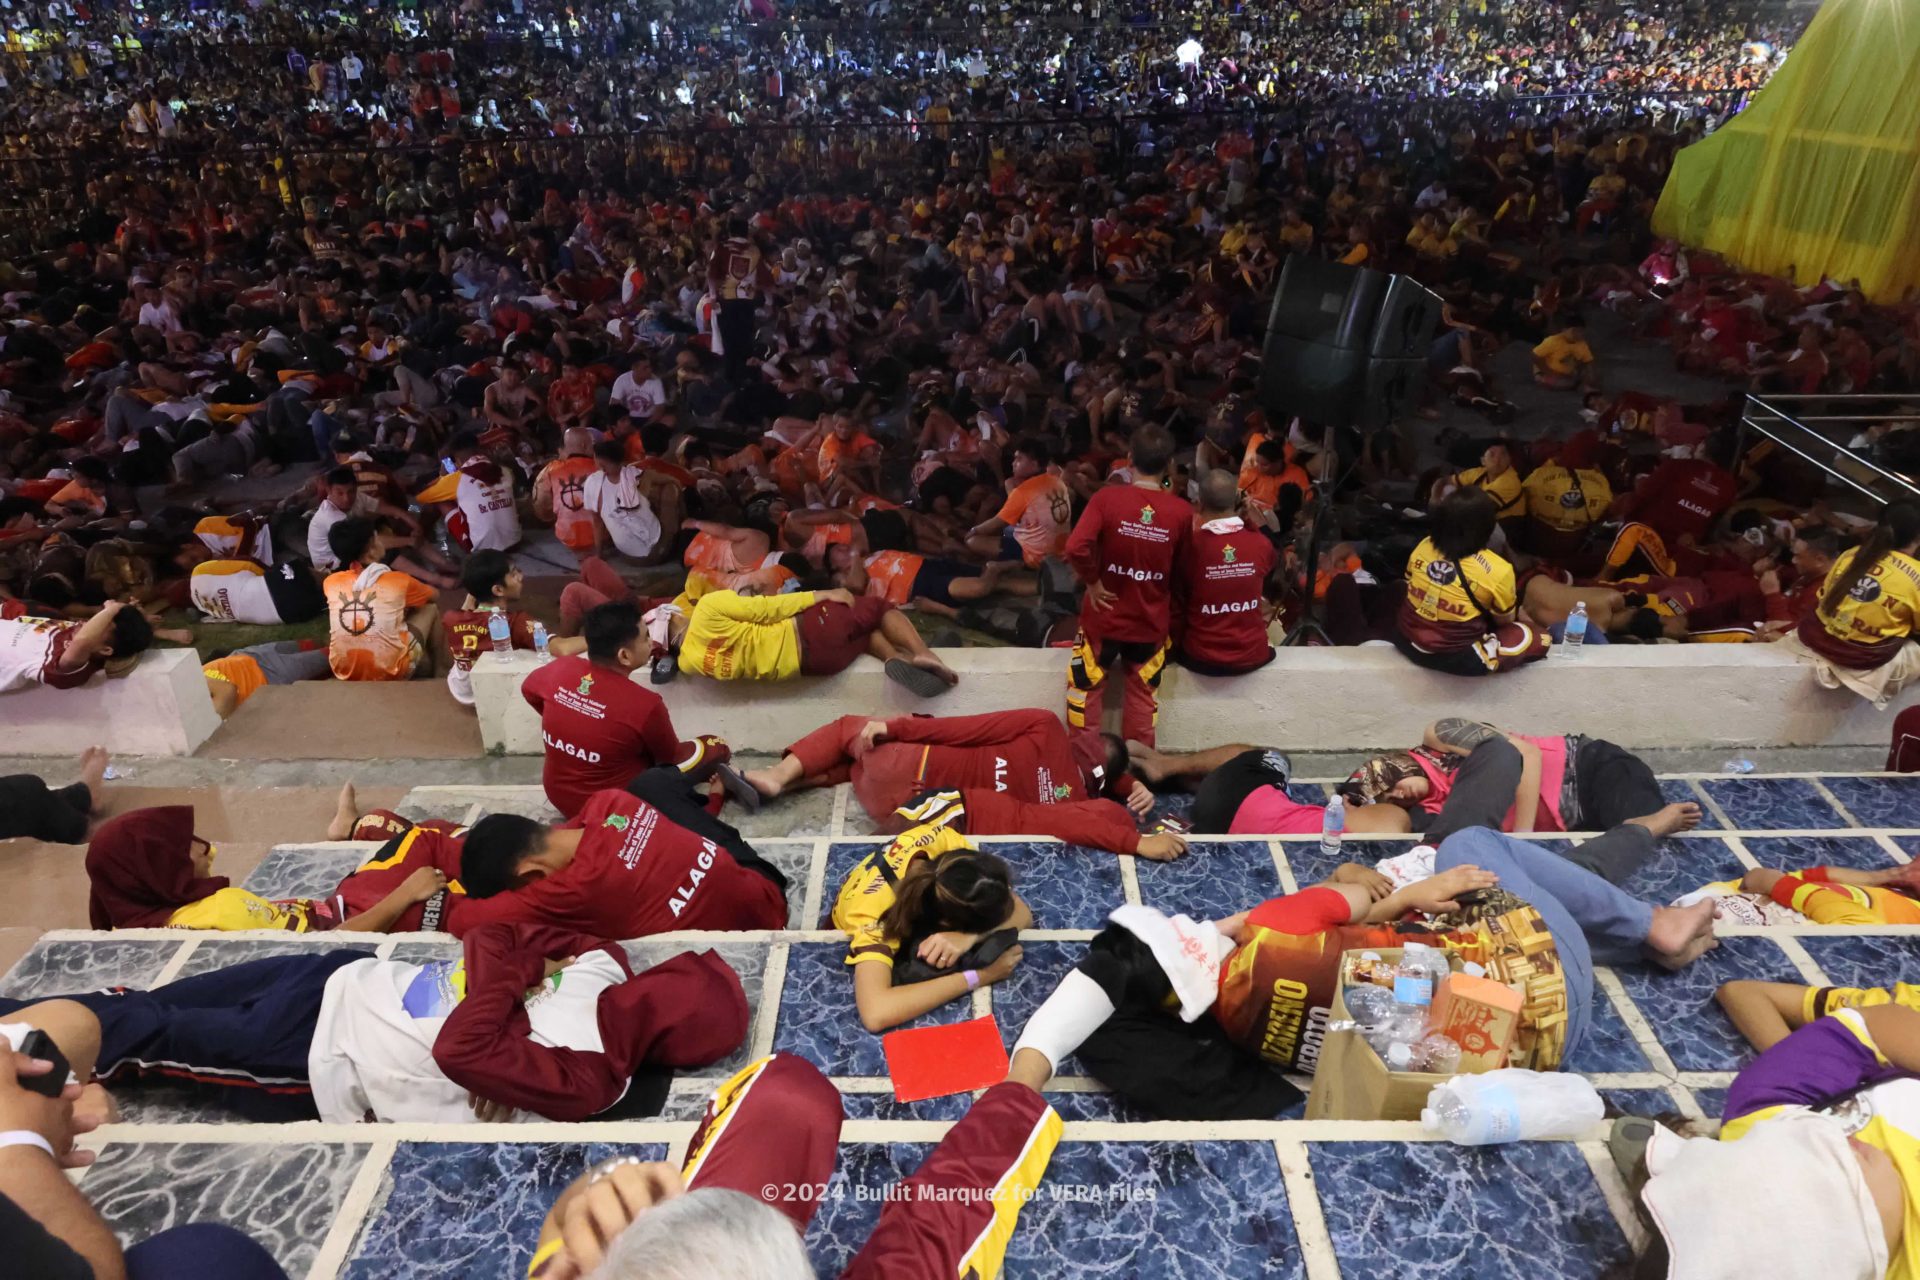 Traslacion 2024: A spectacular display Filipinos’ faith and piety By Bullit Marquez 13/15